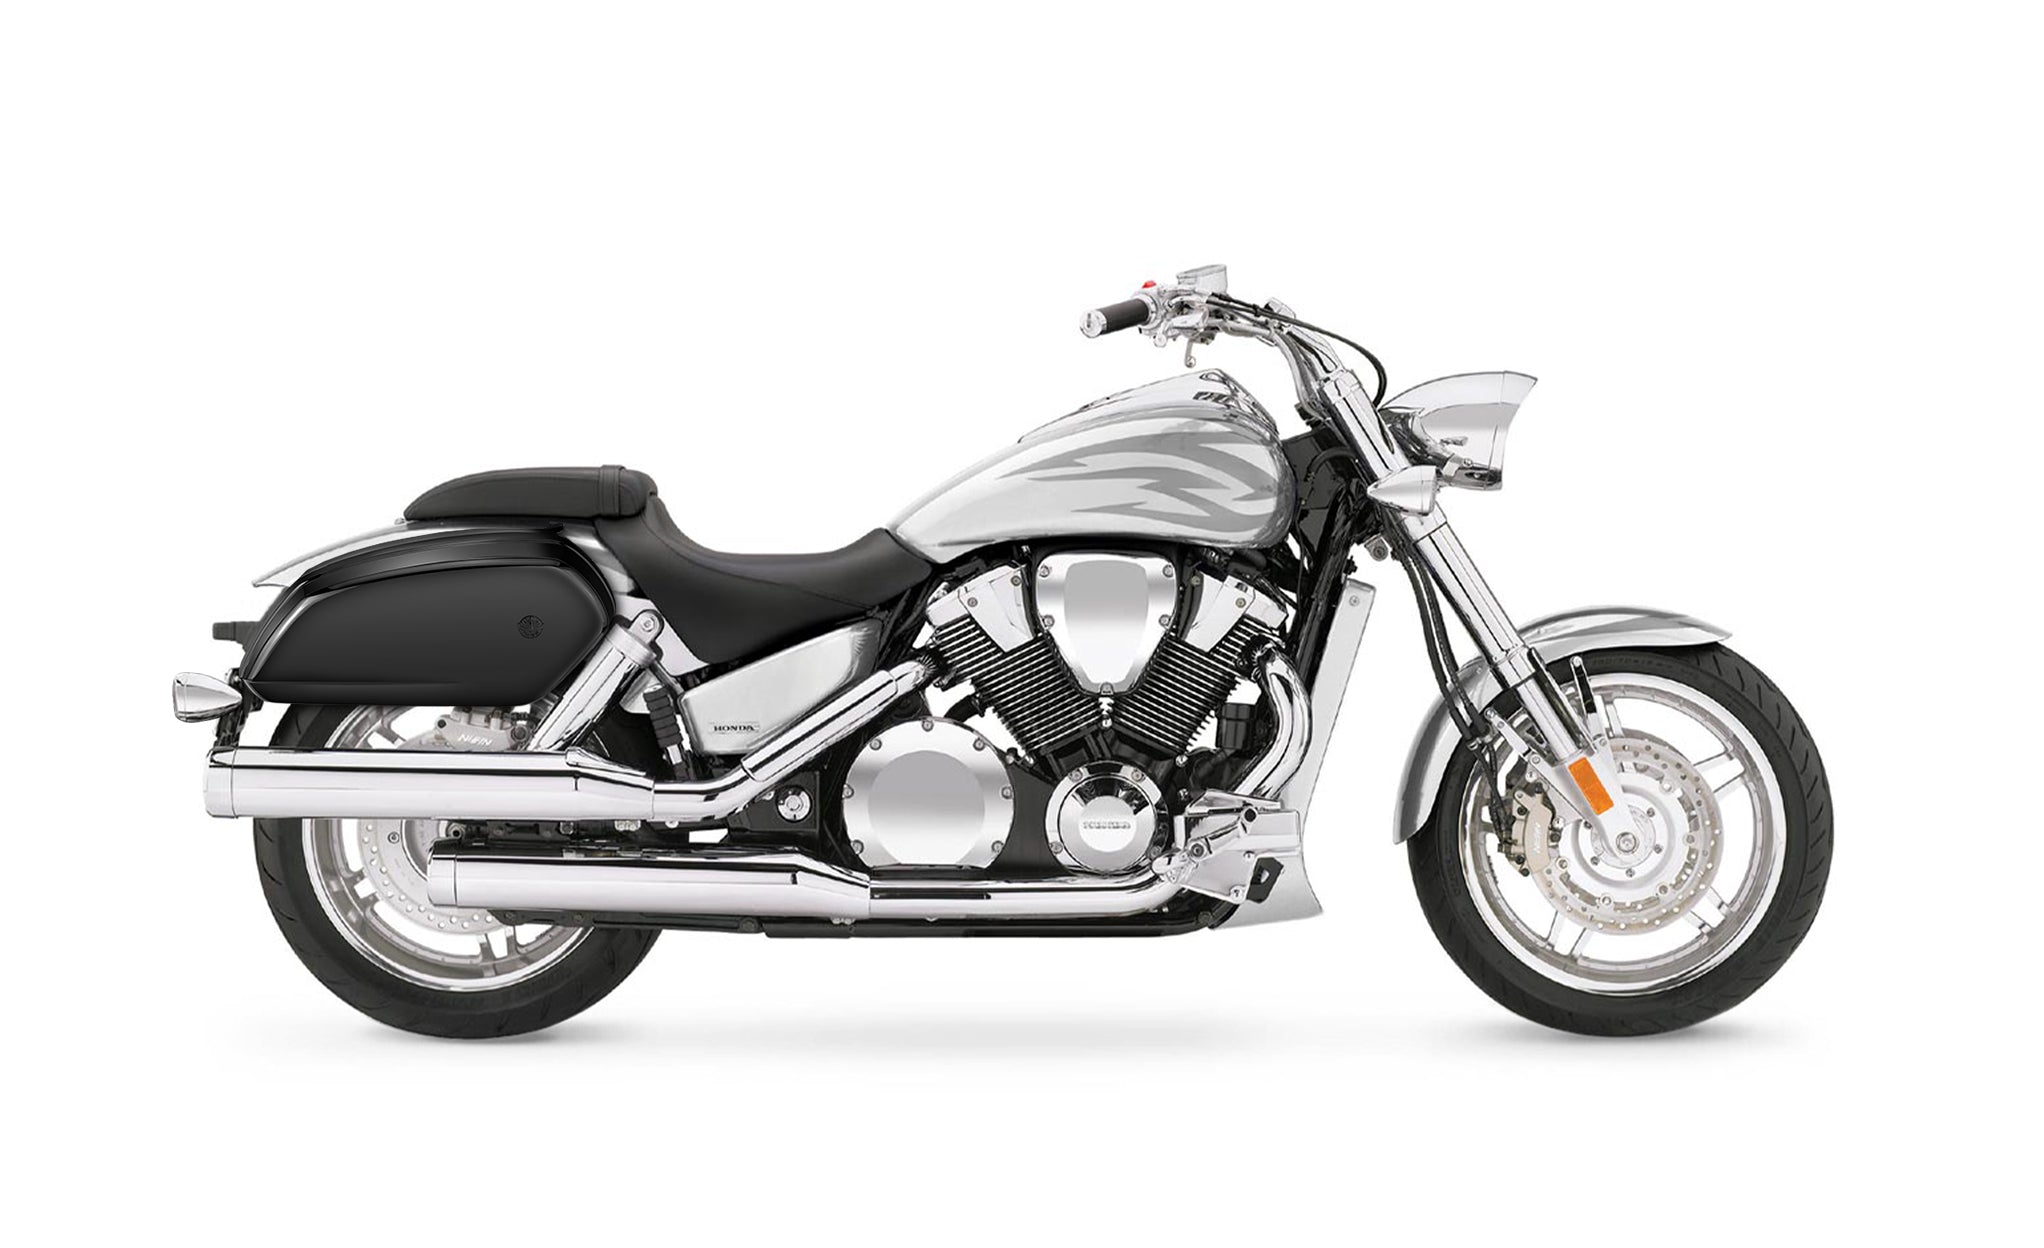 Viking Viper Large Honda Vtx 1800 F Painted Motorcycle Hard Saddlebags Engineering Excellence with Bag on Bike @expand